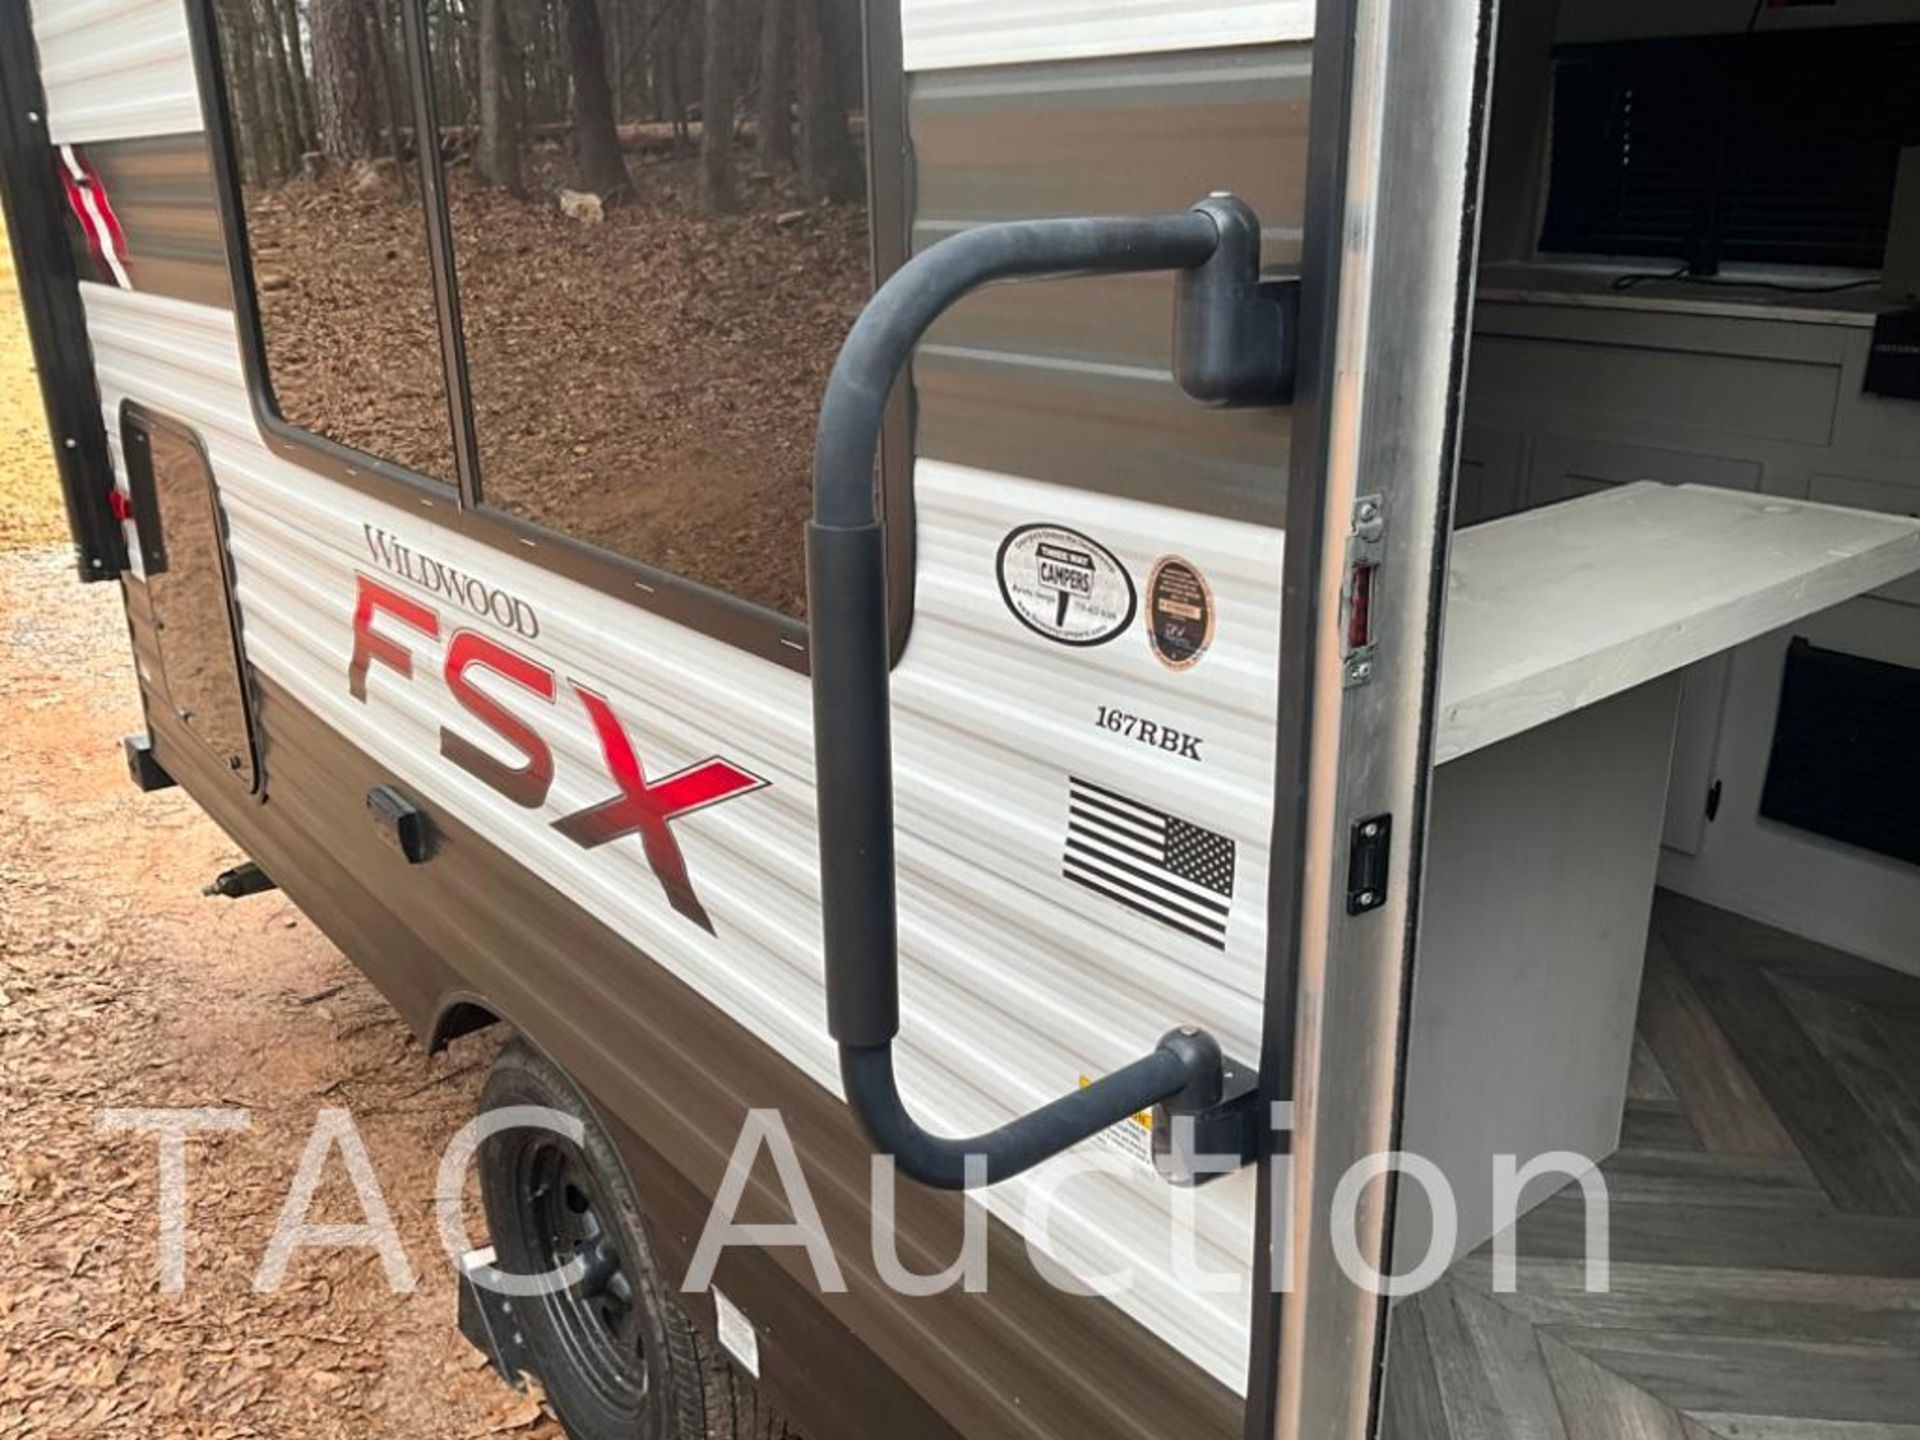 2021 Forest River Wildwood FSX 167RBK Bumper Pull Camper - Image 22 of 85